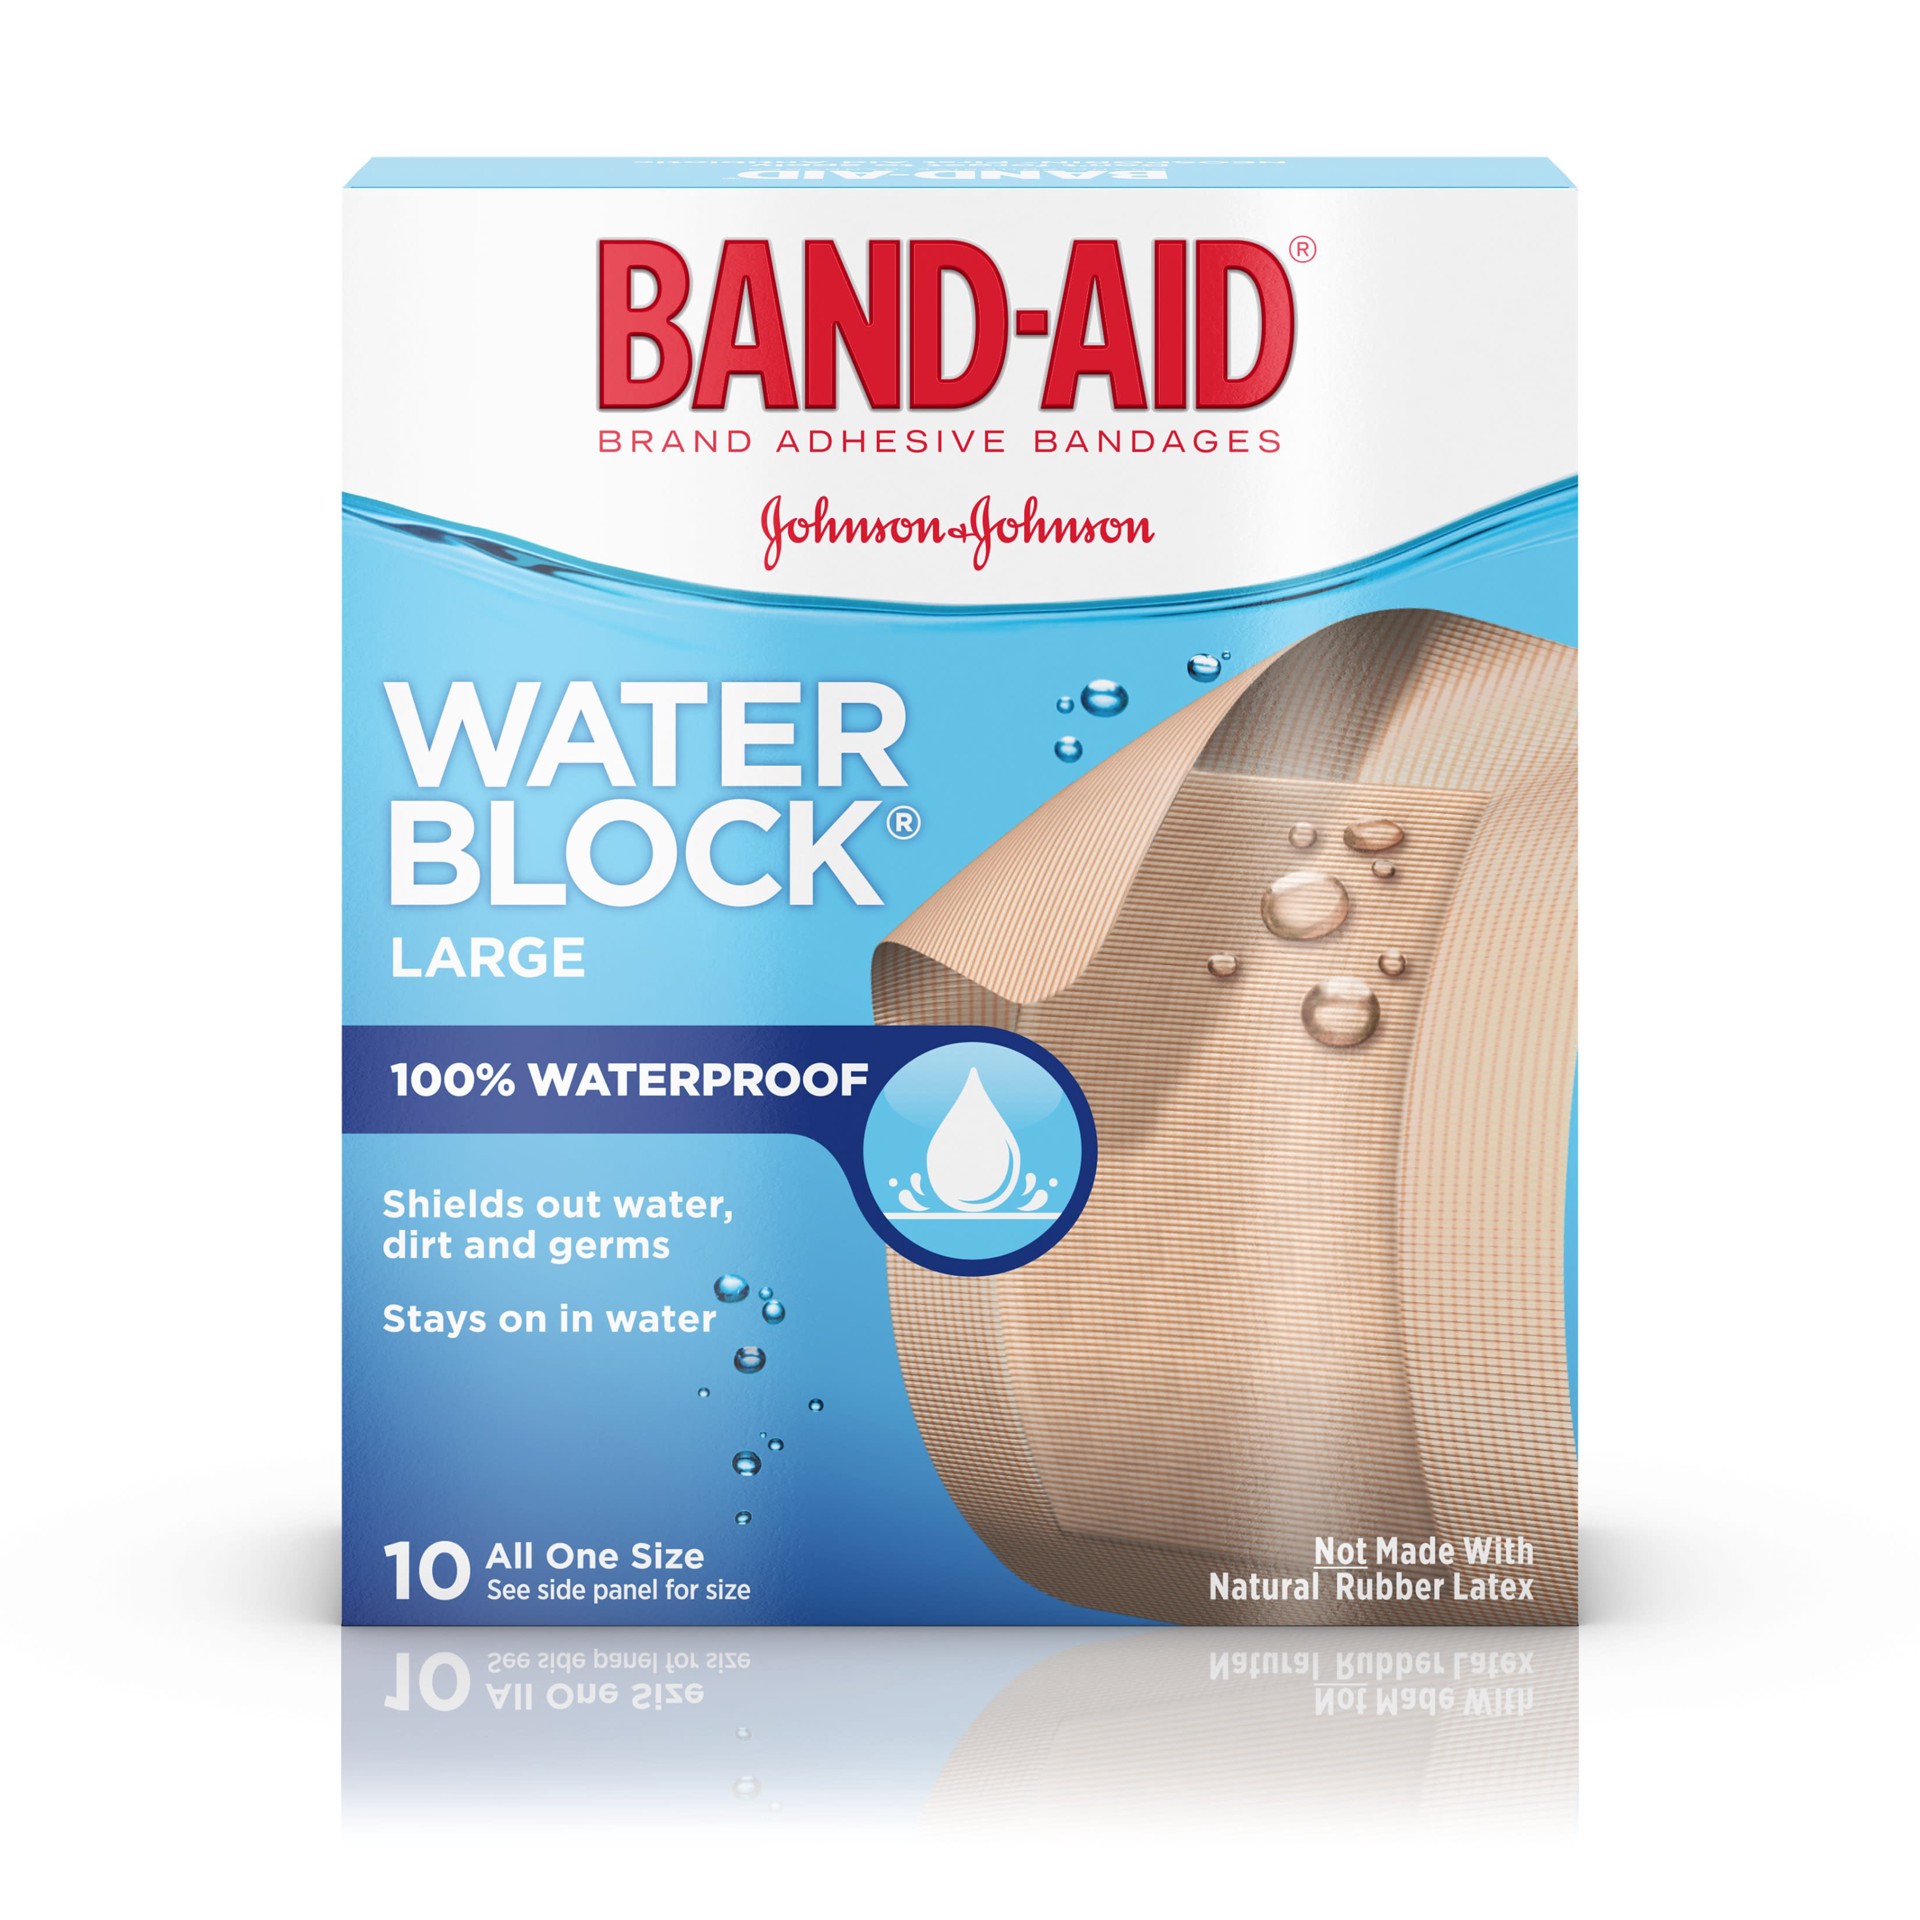 slide 1 of 5, BAND-AID 100% Waterproof Large Band-Aid Brand Water Block Plus Adhesive Bandages for Wound Care of Minor Cuts and Scrapes, 10 ct